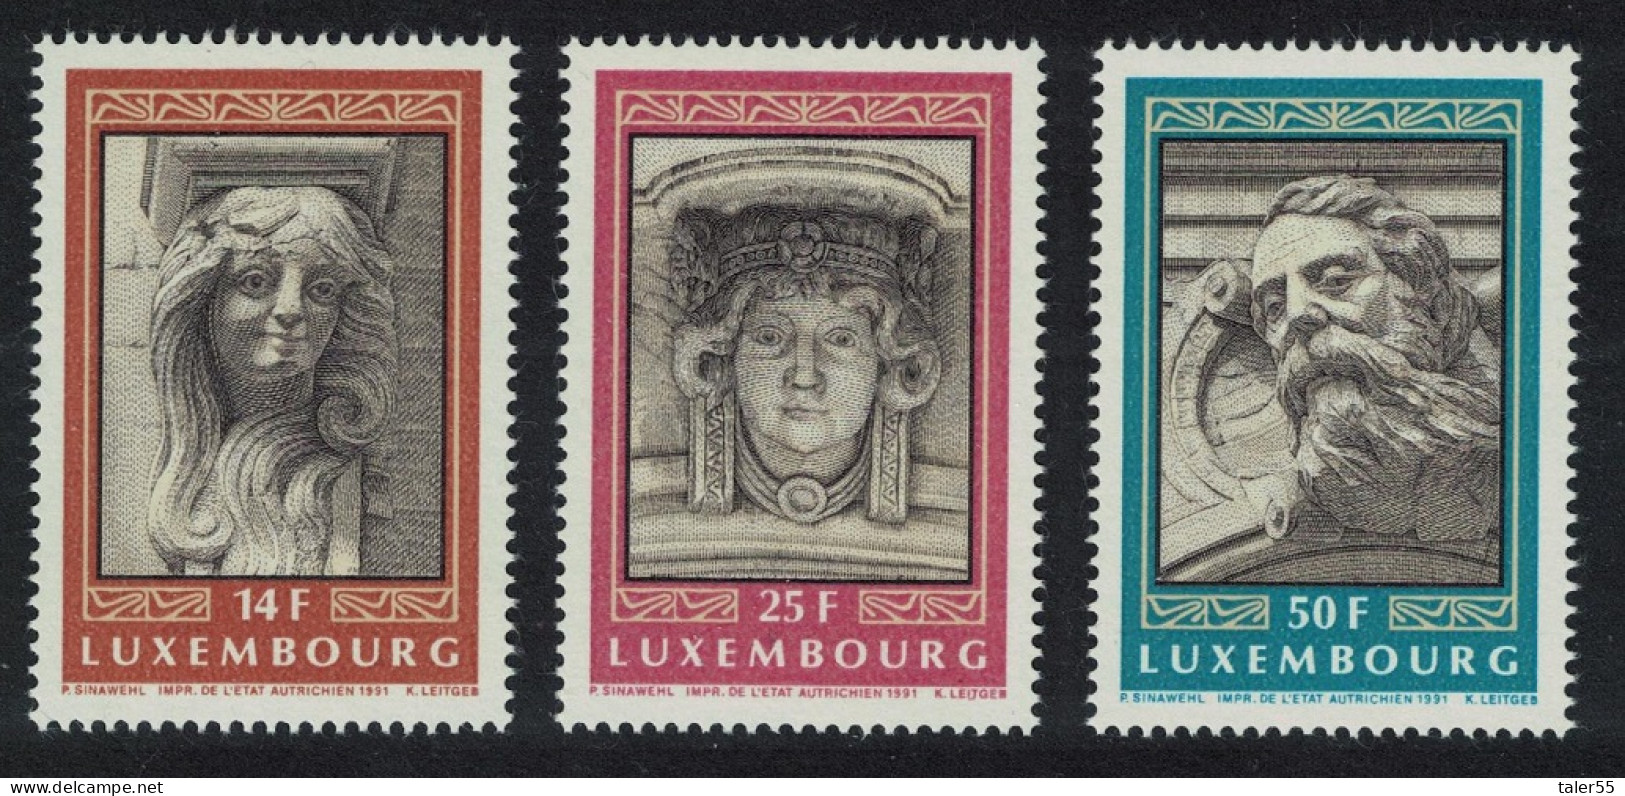 Luxembourg Mascarons Stone Faces On Buildings 3v 1991 MNH SG#1301-1303 MI#1277-1279 - Ungebraucht